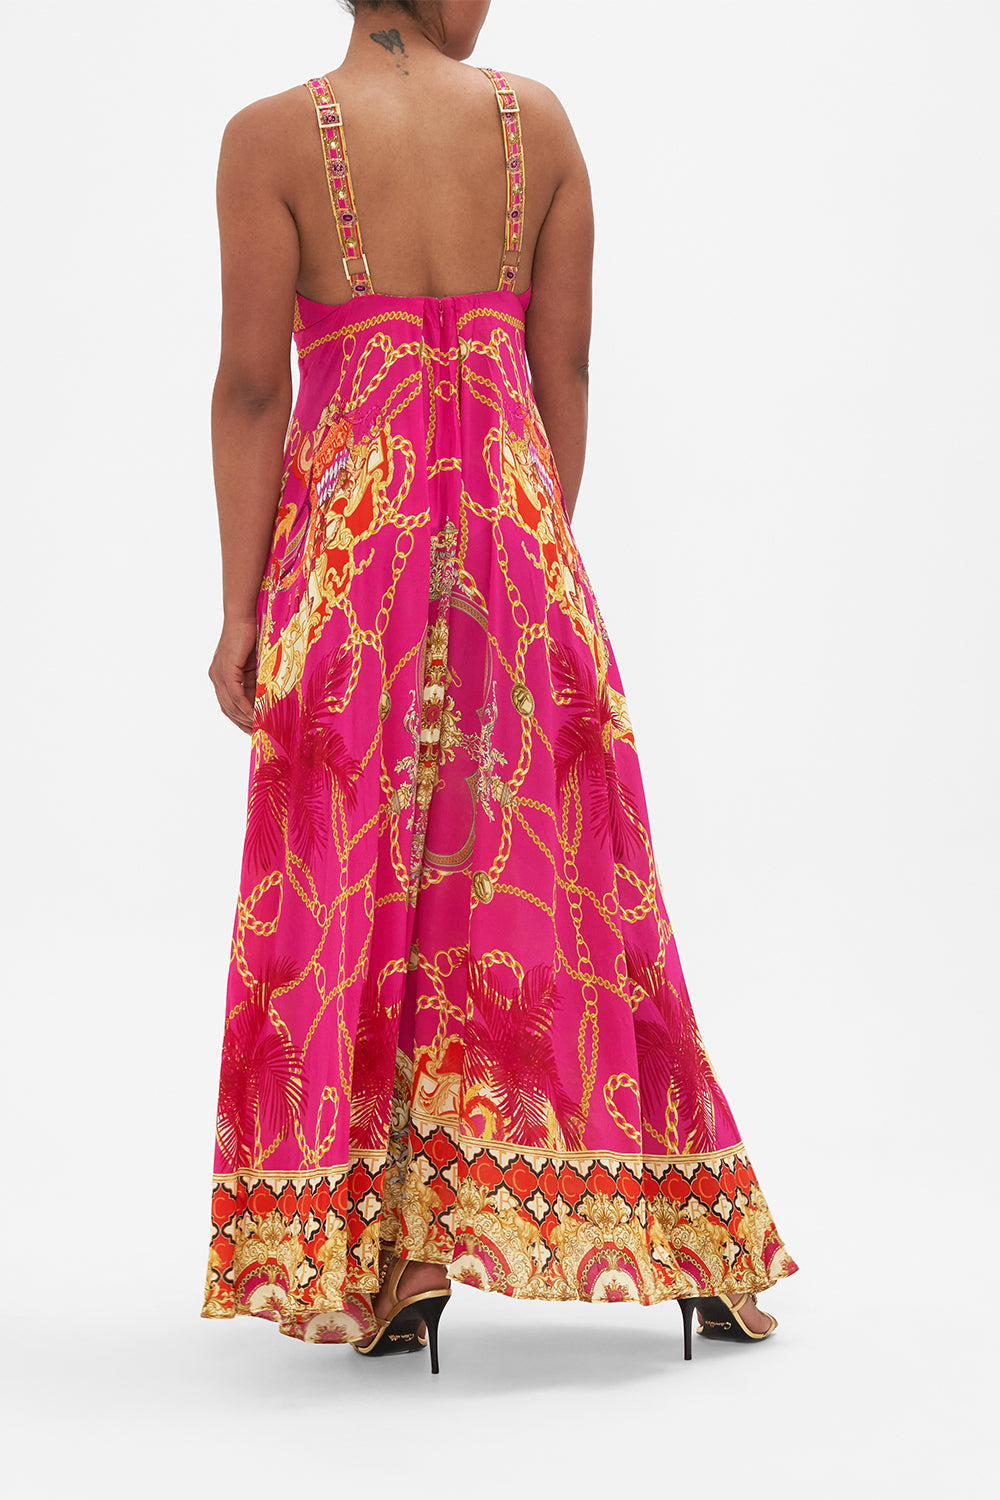 Back view of model wearing CAMILLA pink silk maxi dress in Wild And Running print